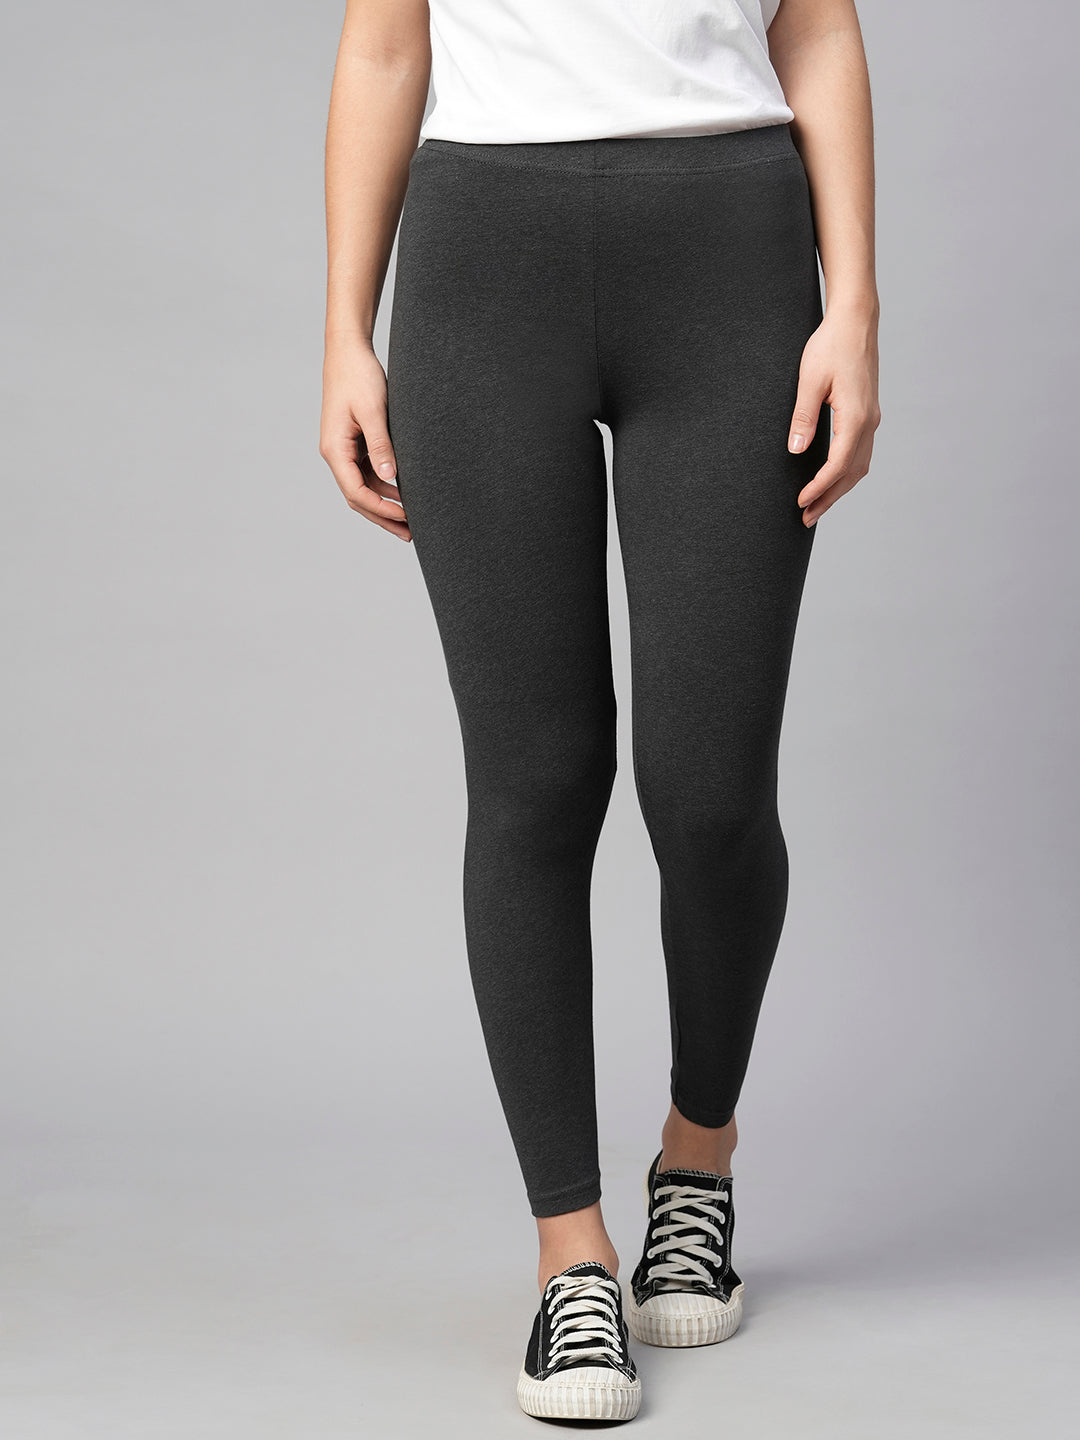 We Tested the 13 Best Flare Yoga Pants and Leggings